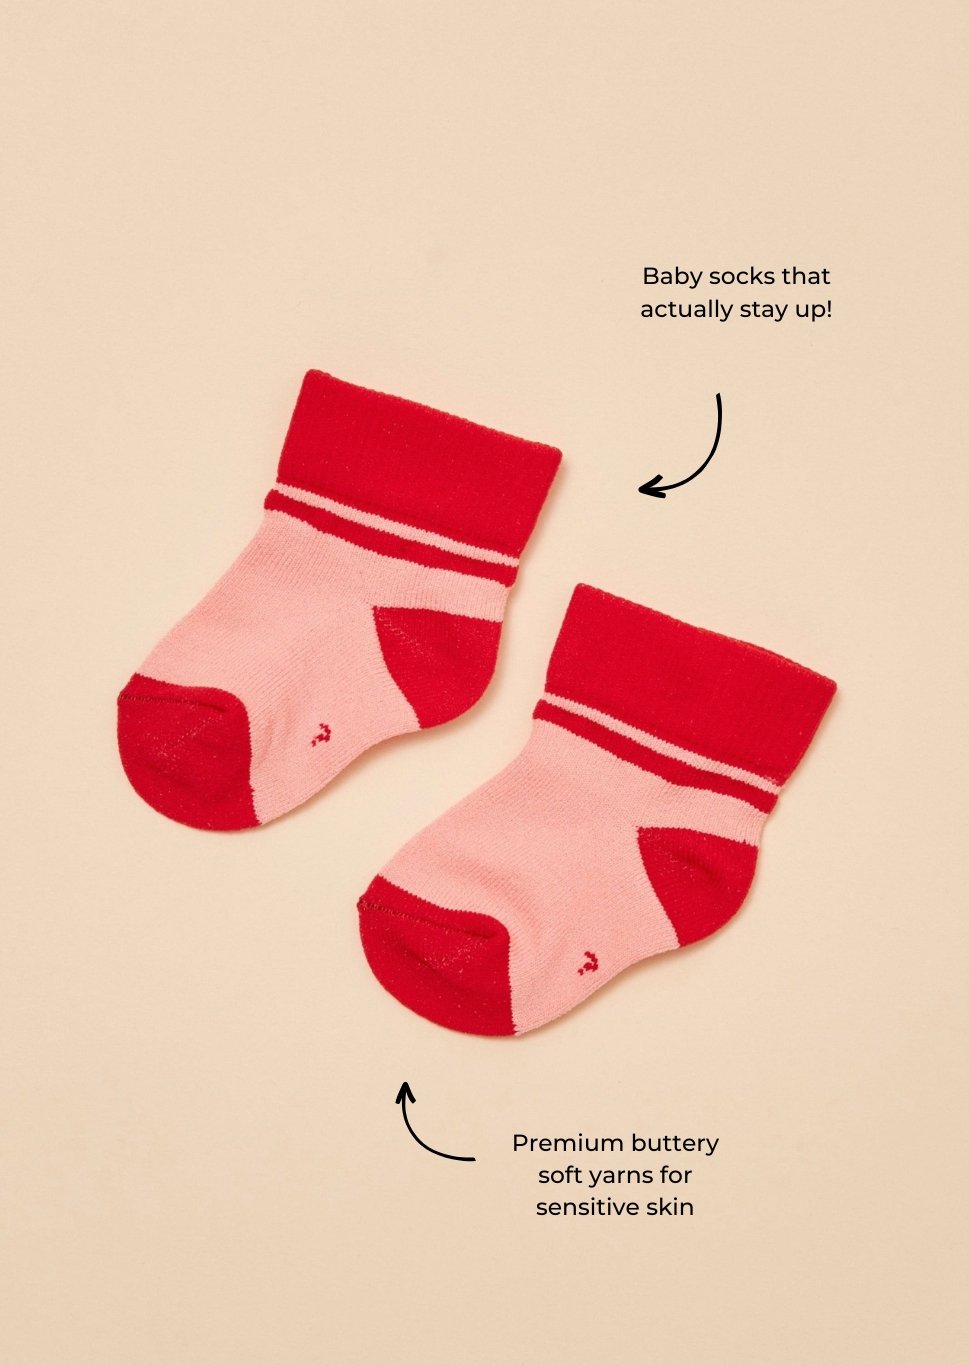 TheRY Soft Bamboo Baby Sock - That stays up! in Red/peach flatlay with features shown